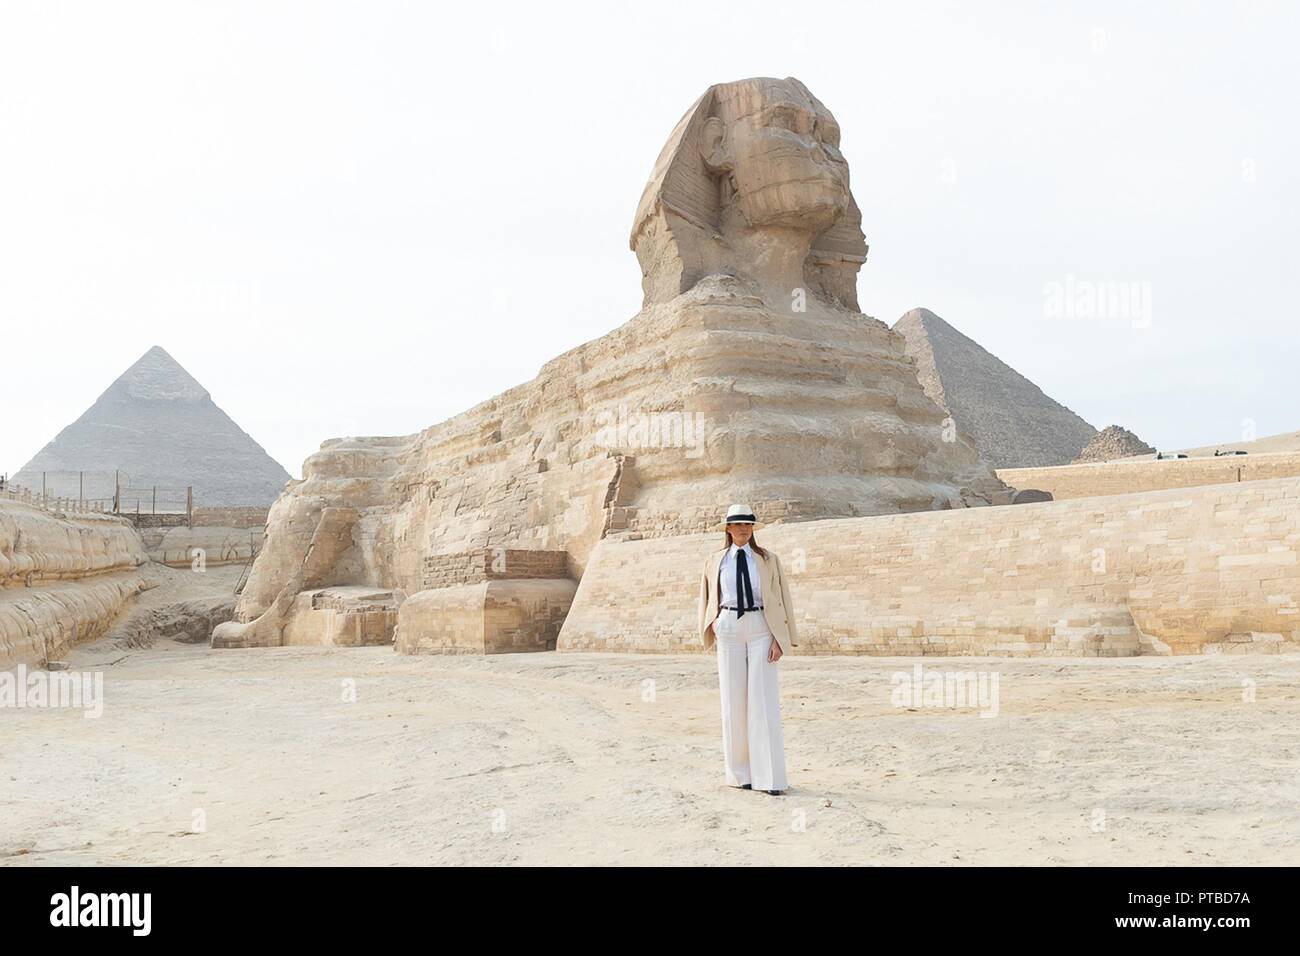 U.S First Lady Melania Trump tours the Great Sphinx of Giza October 6, 2018 outside Cairo, Egypt. The First Lady is on the last leg of her first overseas solo trip. Fashion critics called the First Ladies choice of outfit similar to Michael Jackson, Carmen Sandiego and Indiana Jones. Stock Photo